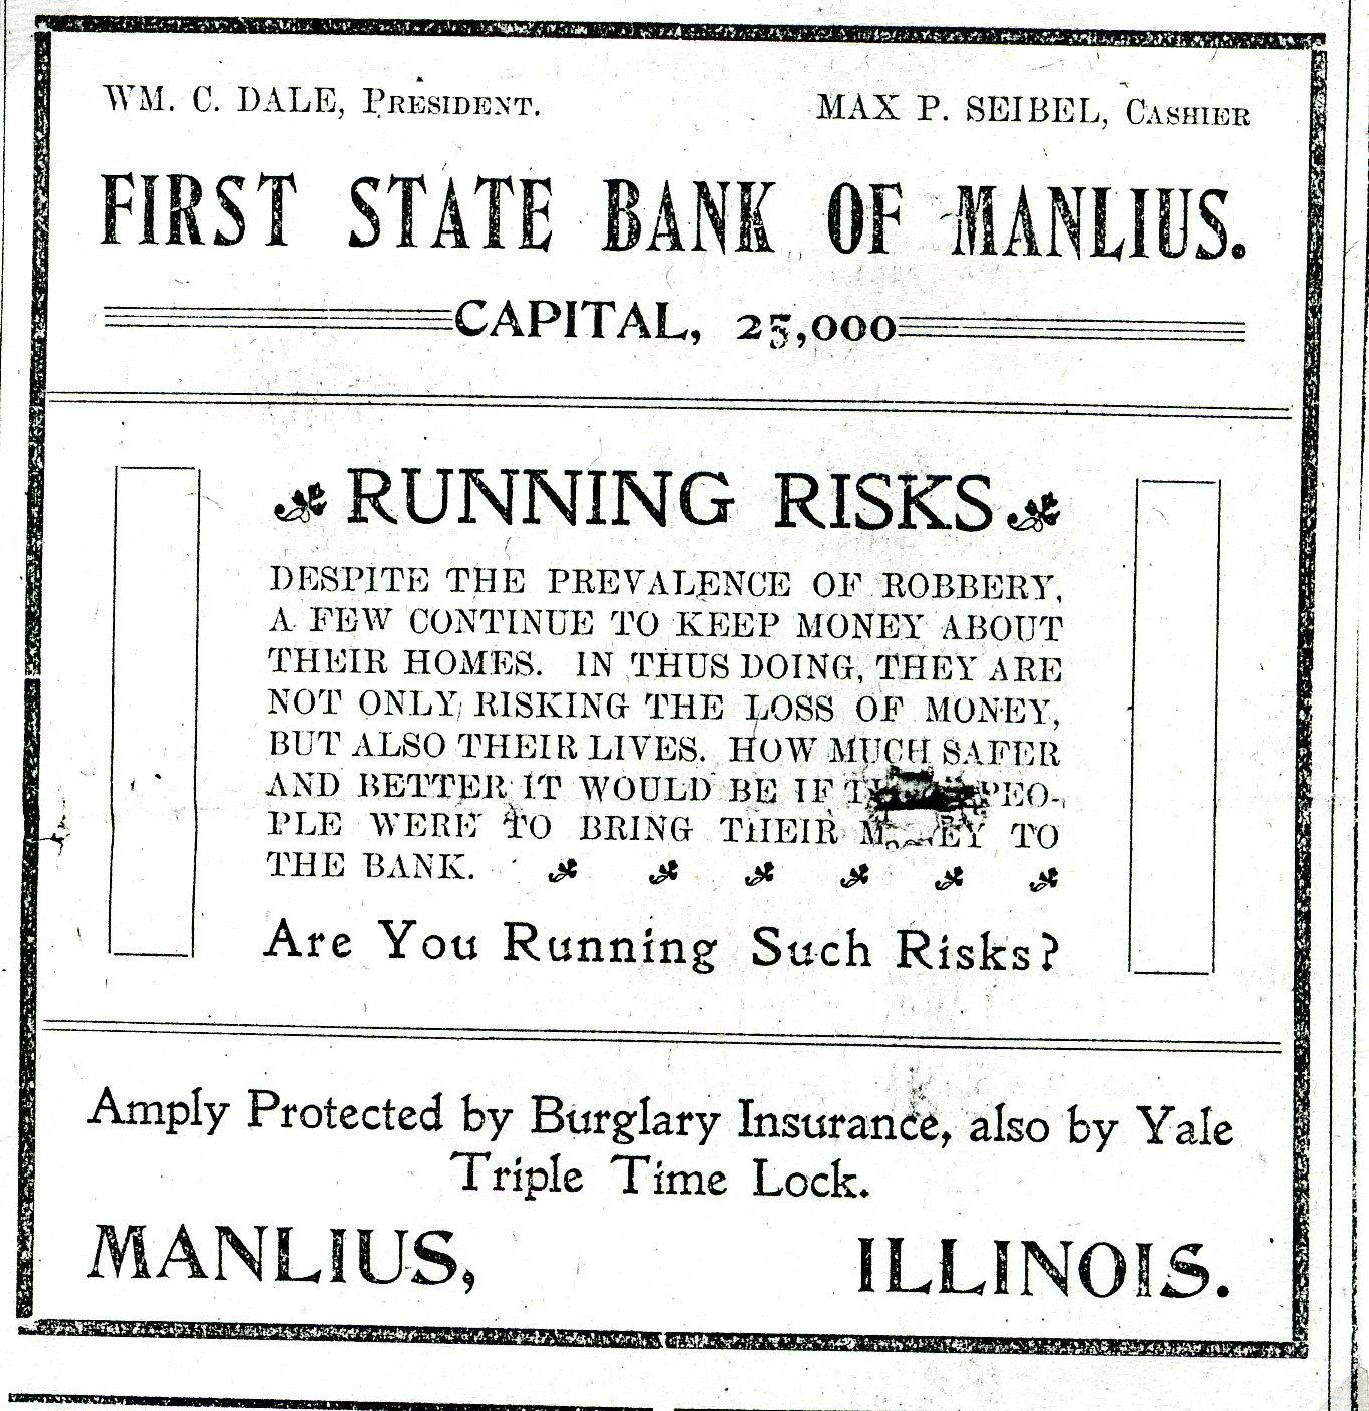 Album 11 FIRST STATE BANK Page 102